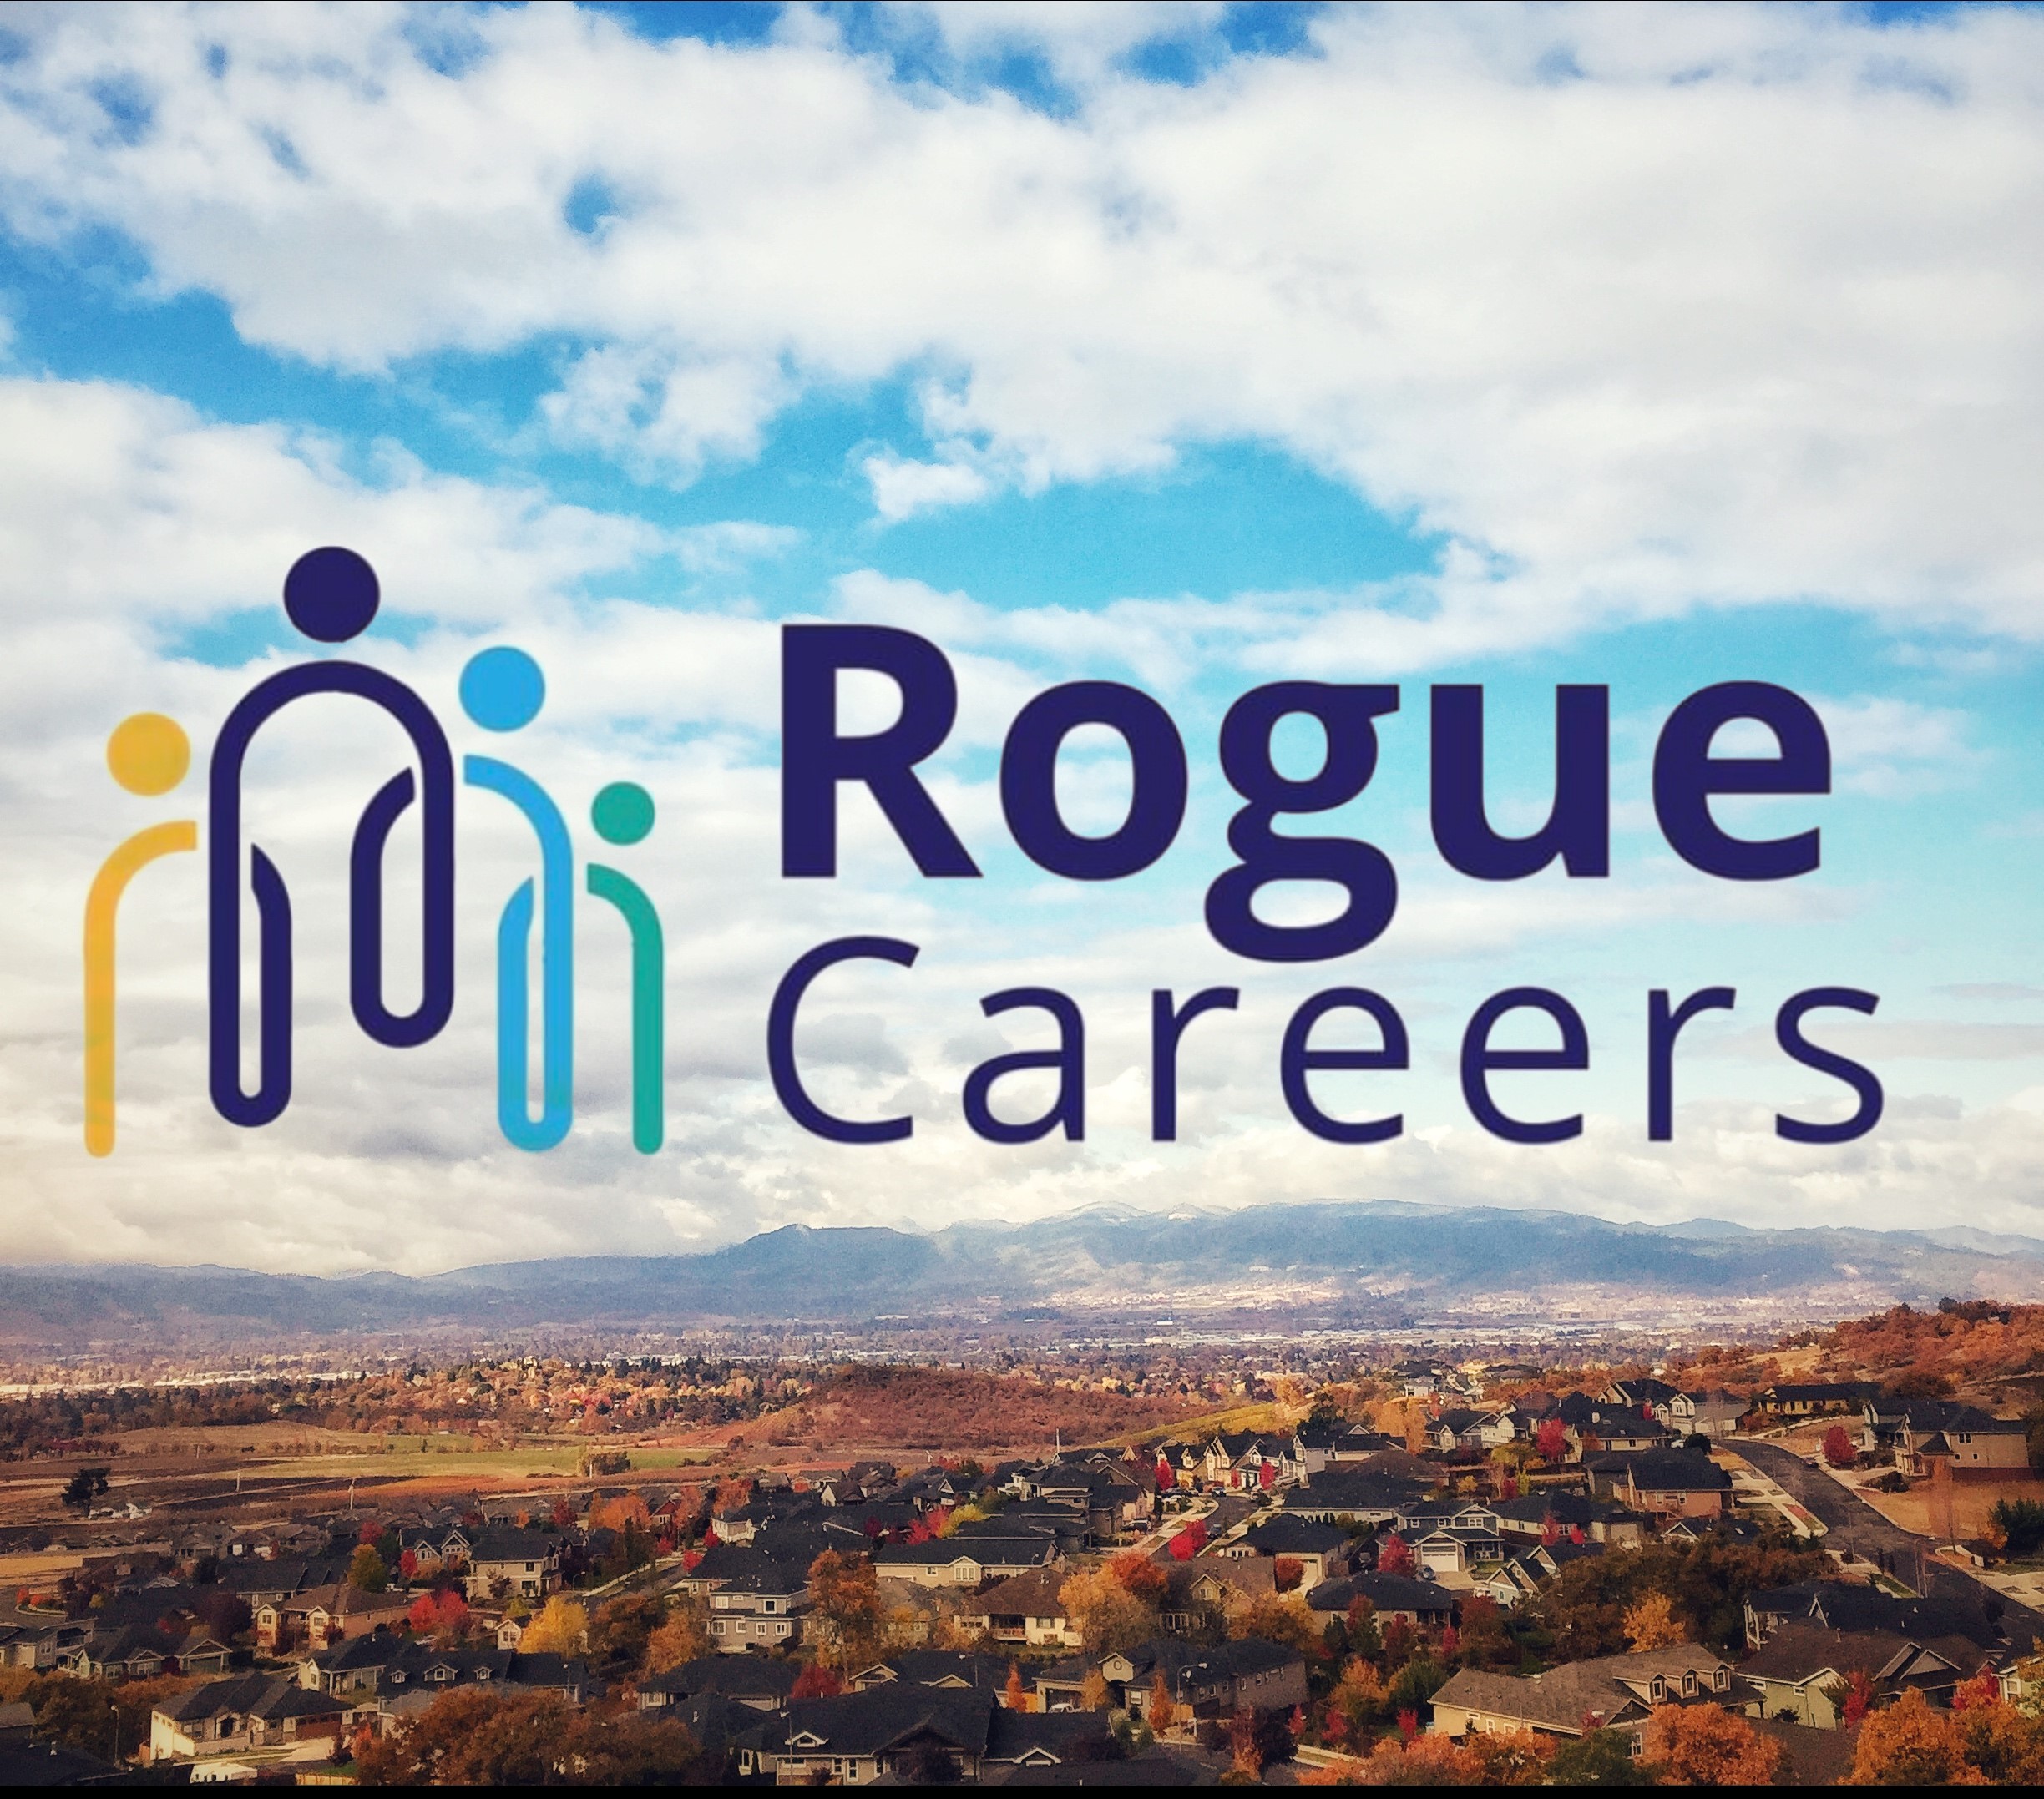 RogueCareers Highlighted on Local TV Channels